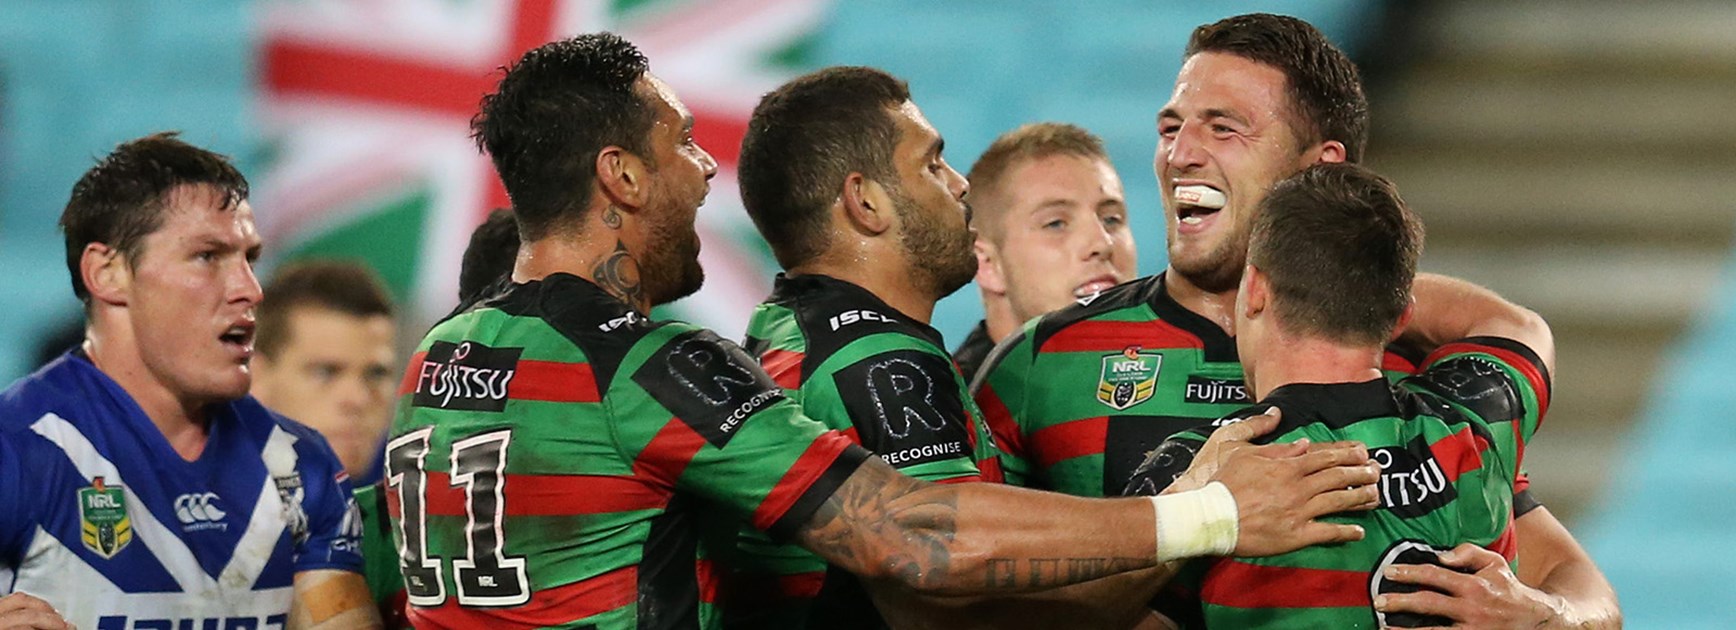 The Rabbitohs celebrate a try to Sam Burgess against the Bulldogs.